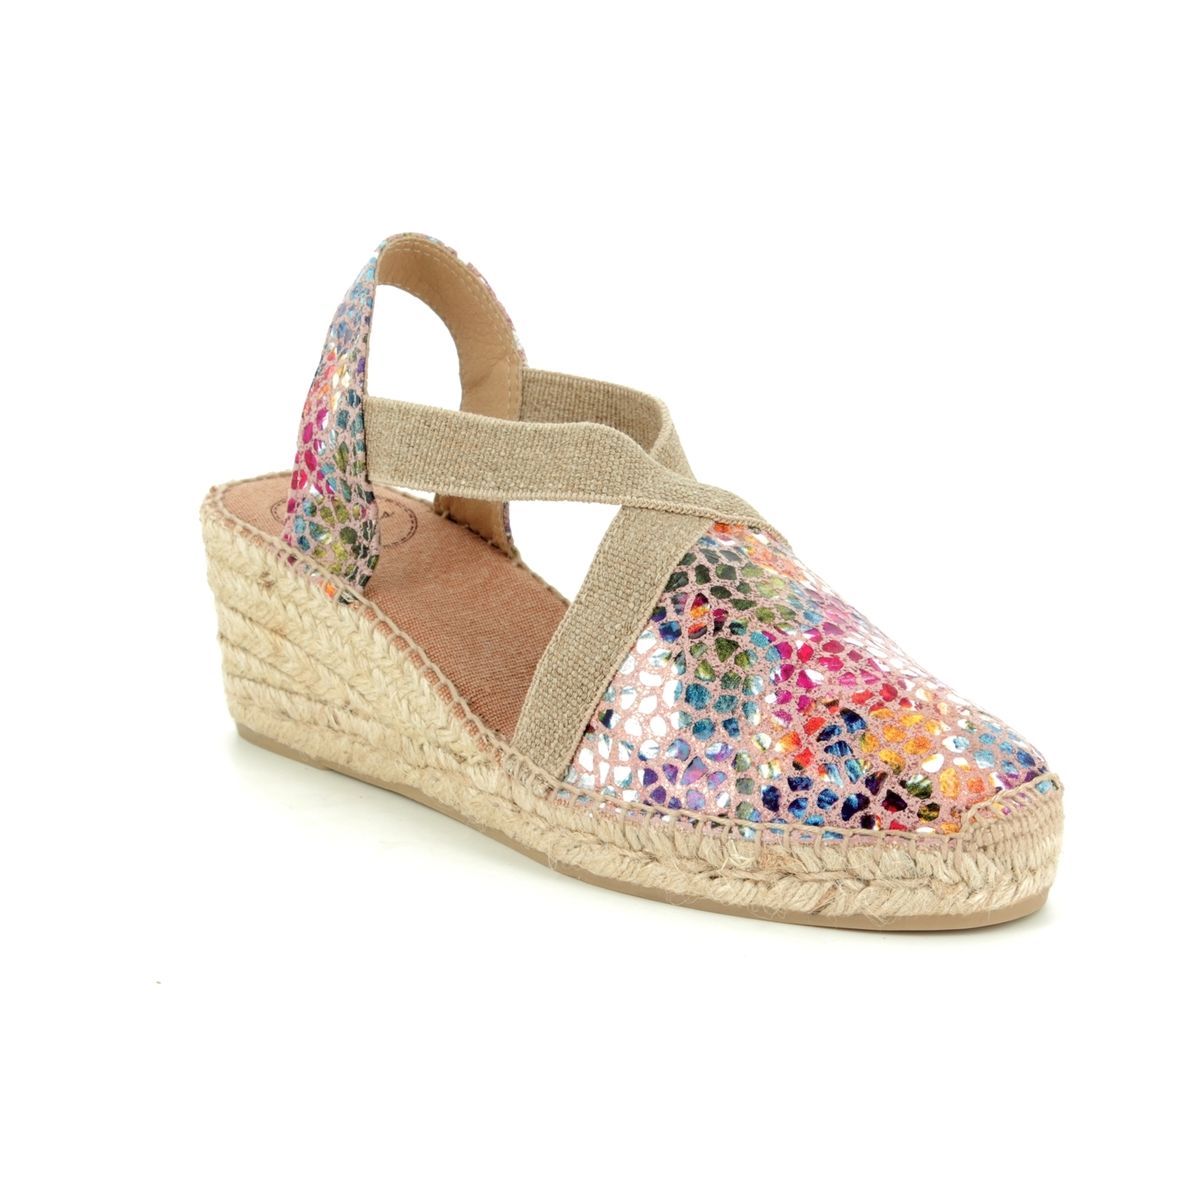 Toni Pons Telva Pm Taupe multi Womens Espadrilles 9105-50 in a Plain Leather in Size 40